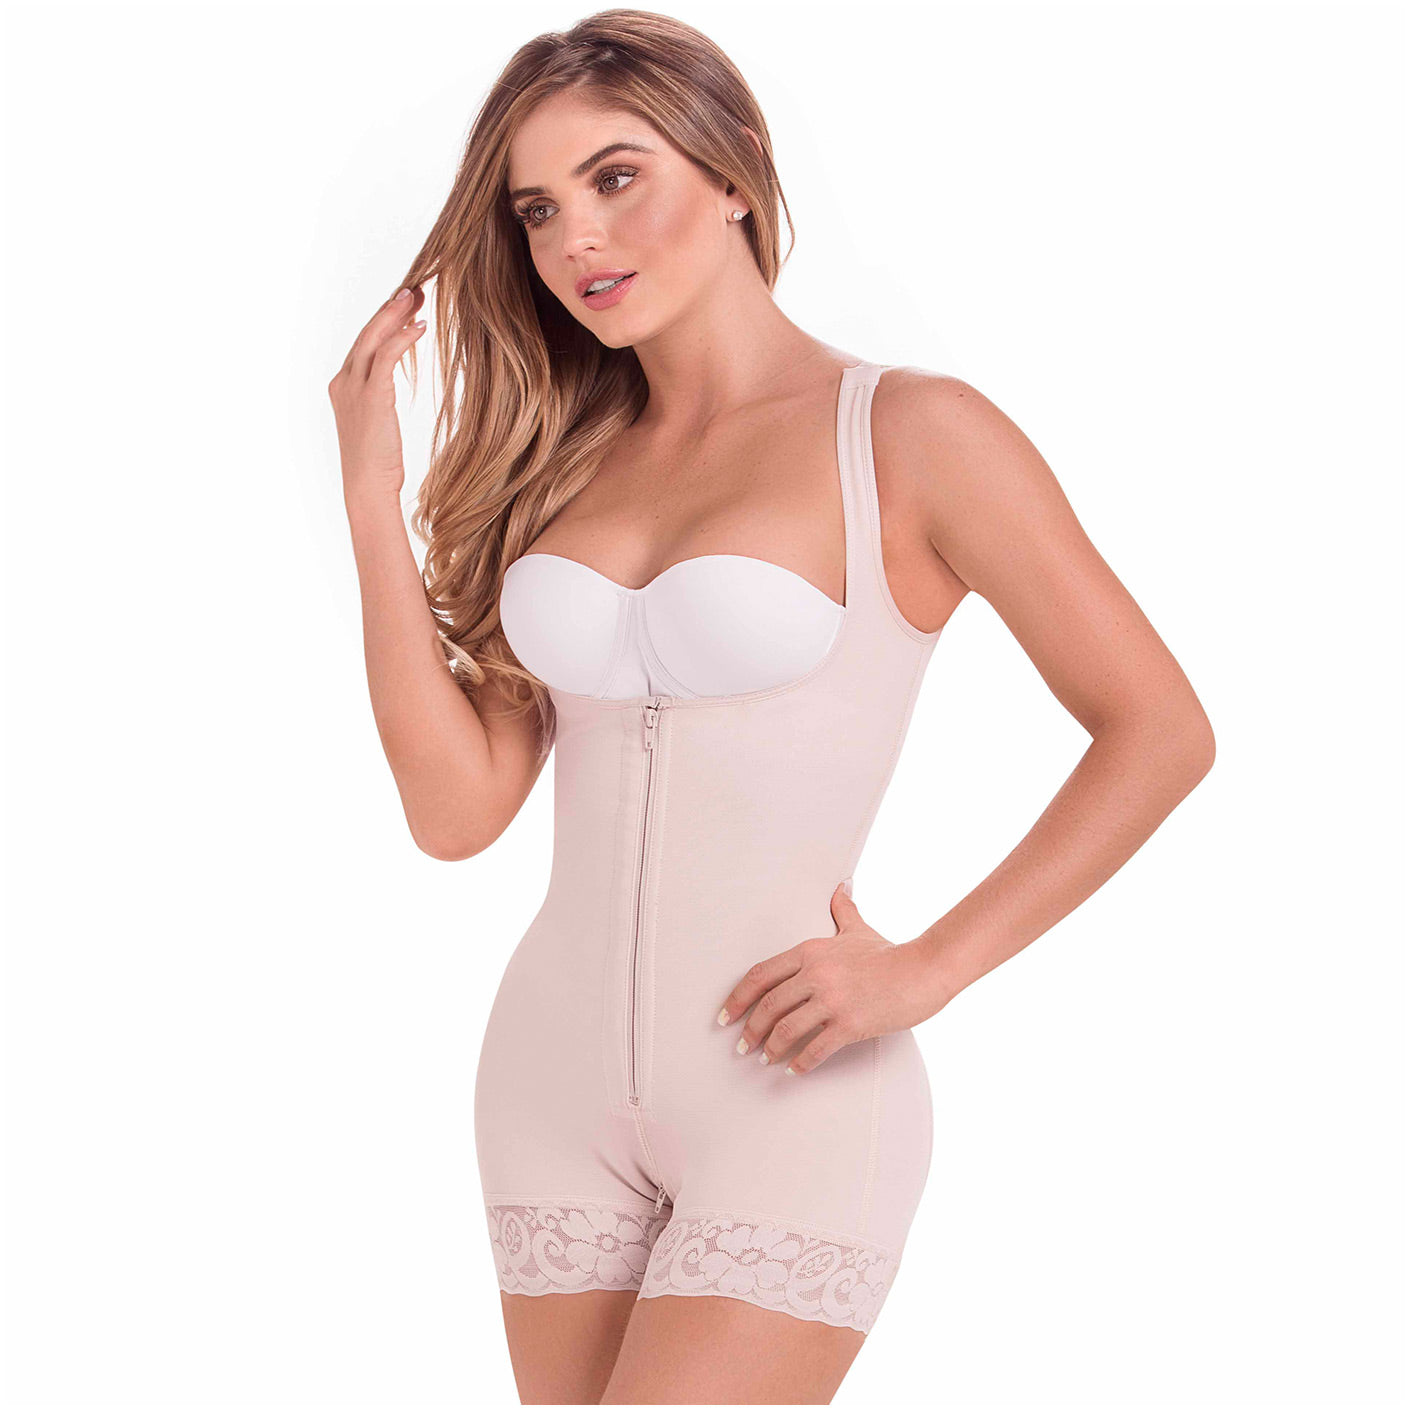 Fajas Salome 0217, Mid Thigh Firm Compression Full Body Shaper for Women, Butt  Lifter Open Bust Postpartum Bodysuit